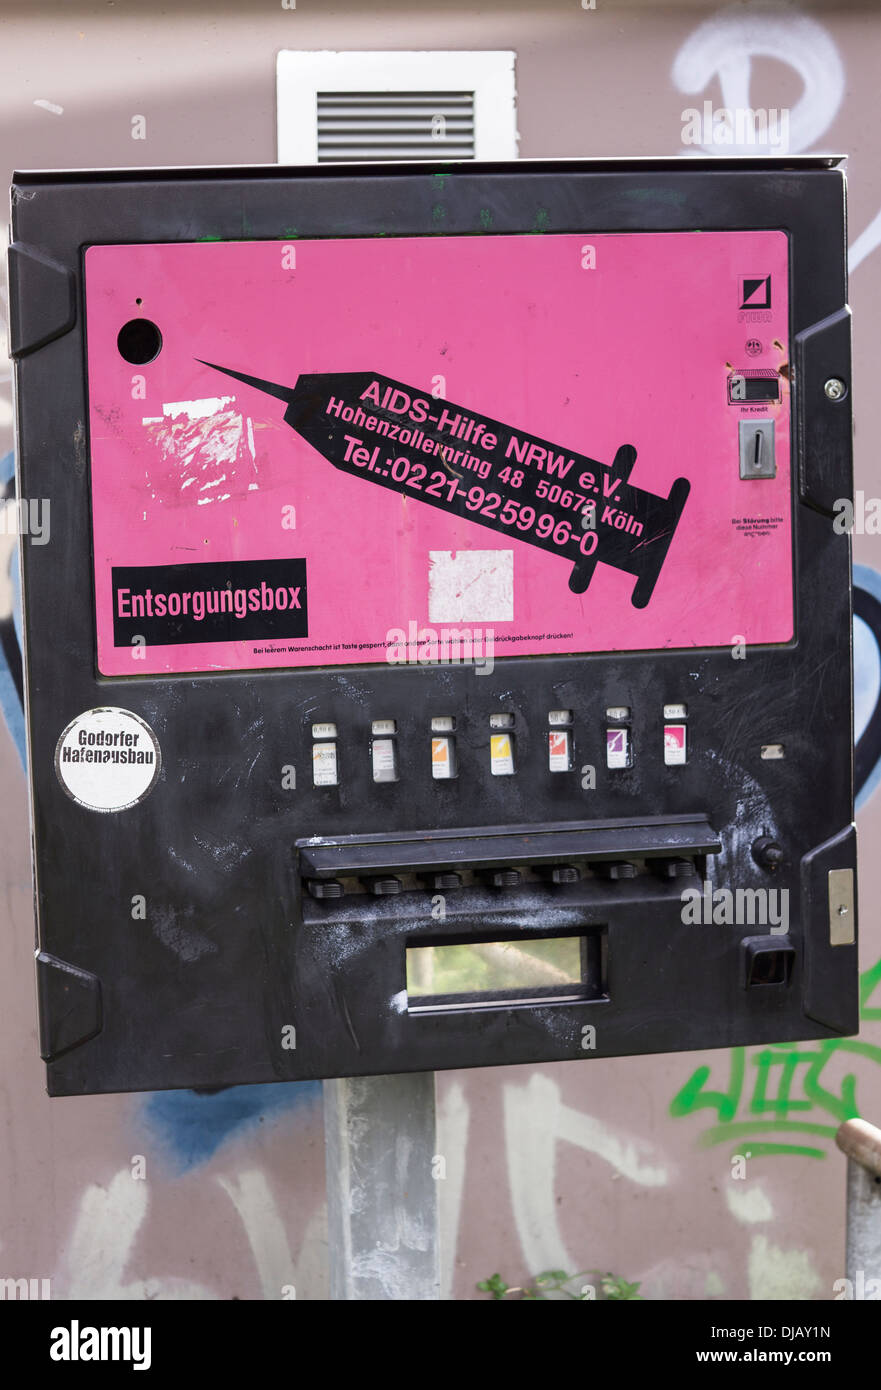 needle exchange box for safe disposal and exchange of used syringes against new and sterile ones, cologne, north rhine-westfalia Stock Photo